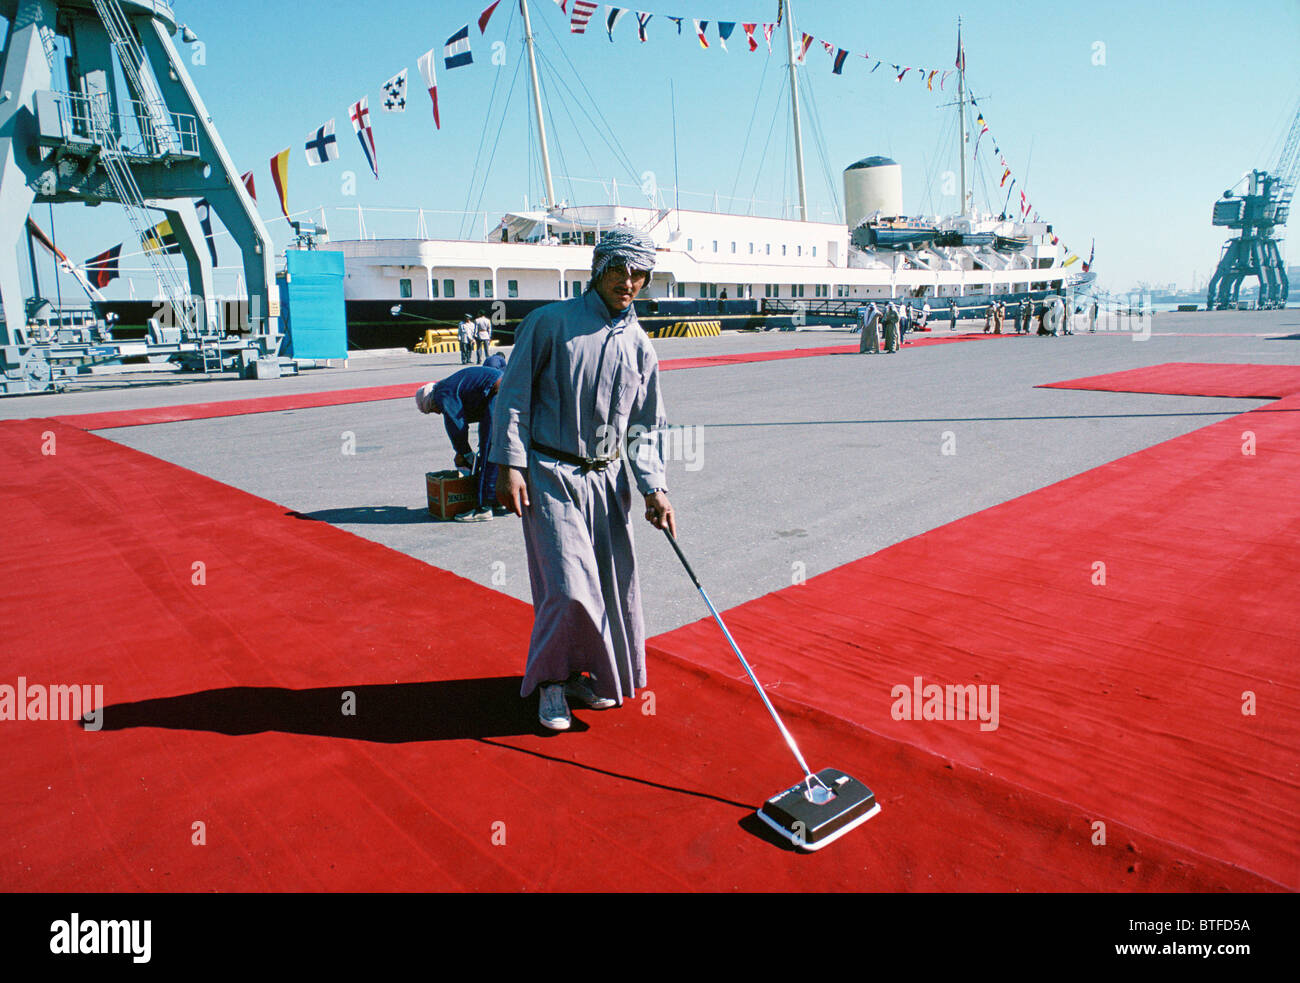 The red carpet being cleaned for VIP visit in Kuwait Stock Photo